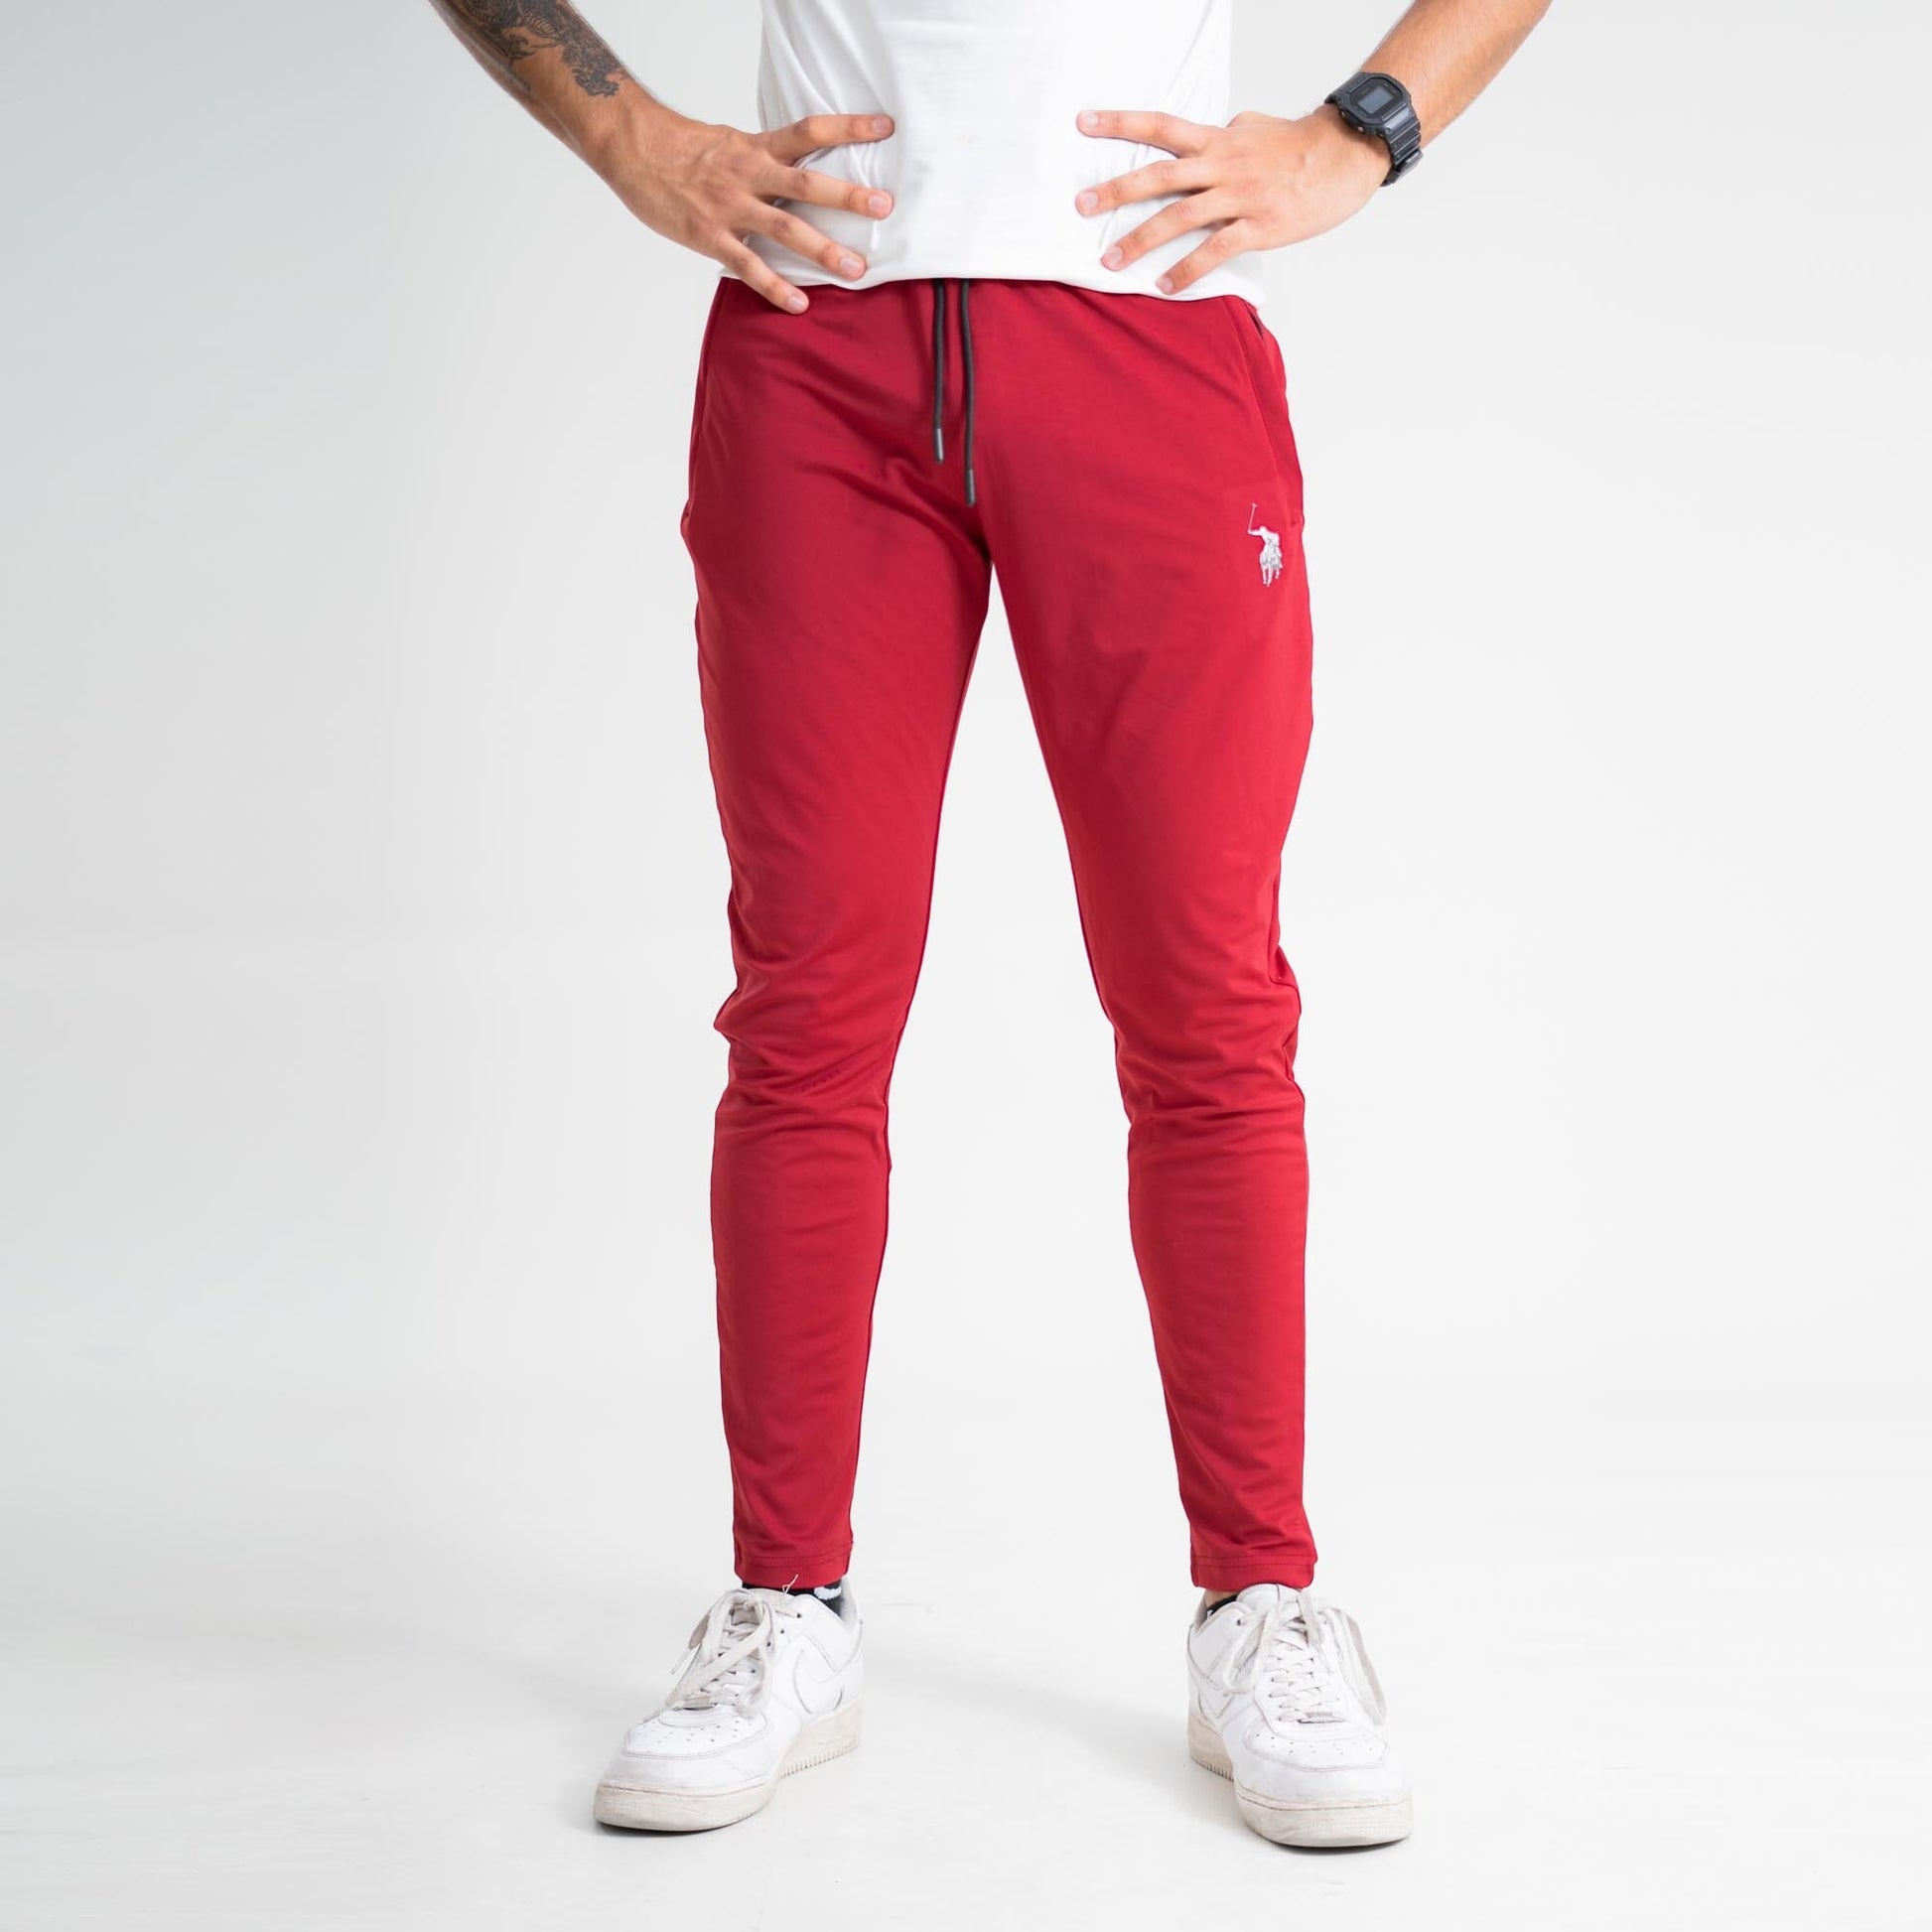 Polo Athletica Men's Slim-Fit Gym Activewear Joggers with Pony Print - Quick Dry Stretch Fabric Men's Trousers Polo Republica Maroon S 